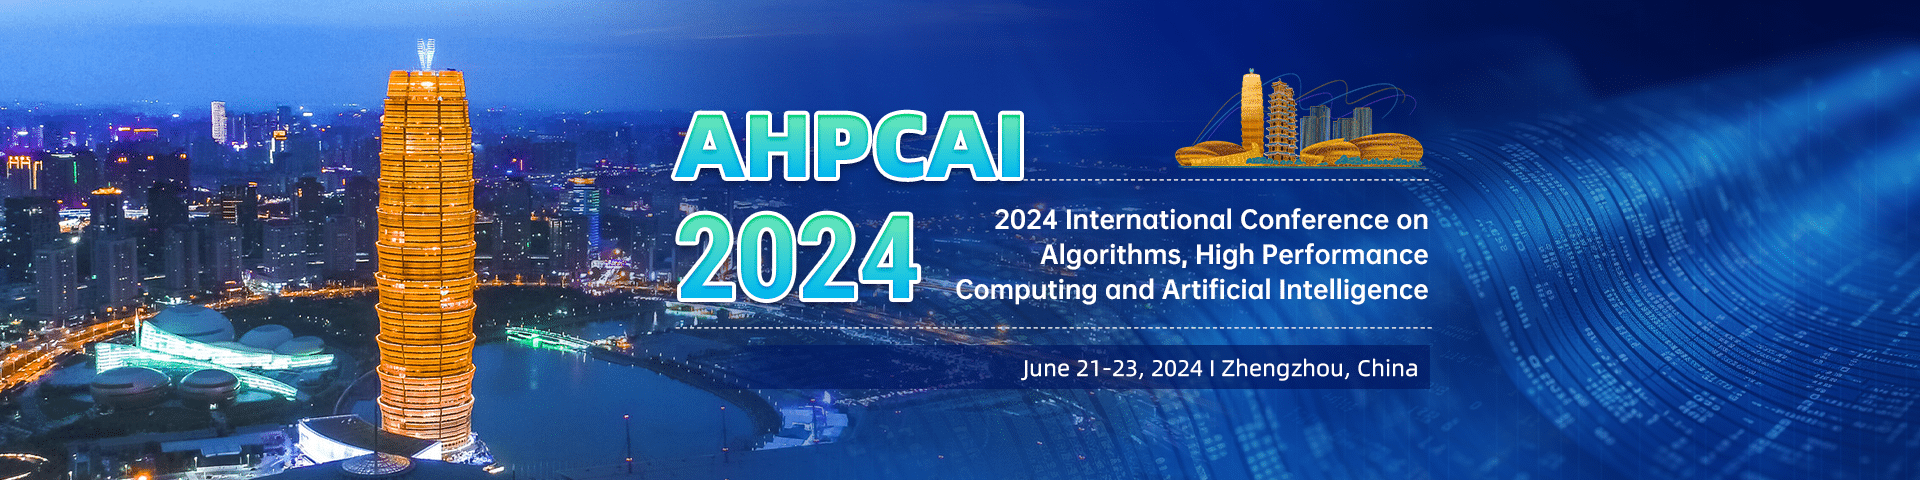 2024 International Conference on Algorithms, High Performance Computing, and Artificial Intelligence (AHPCAI 2024)